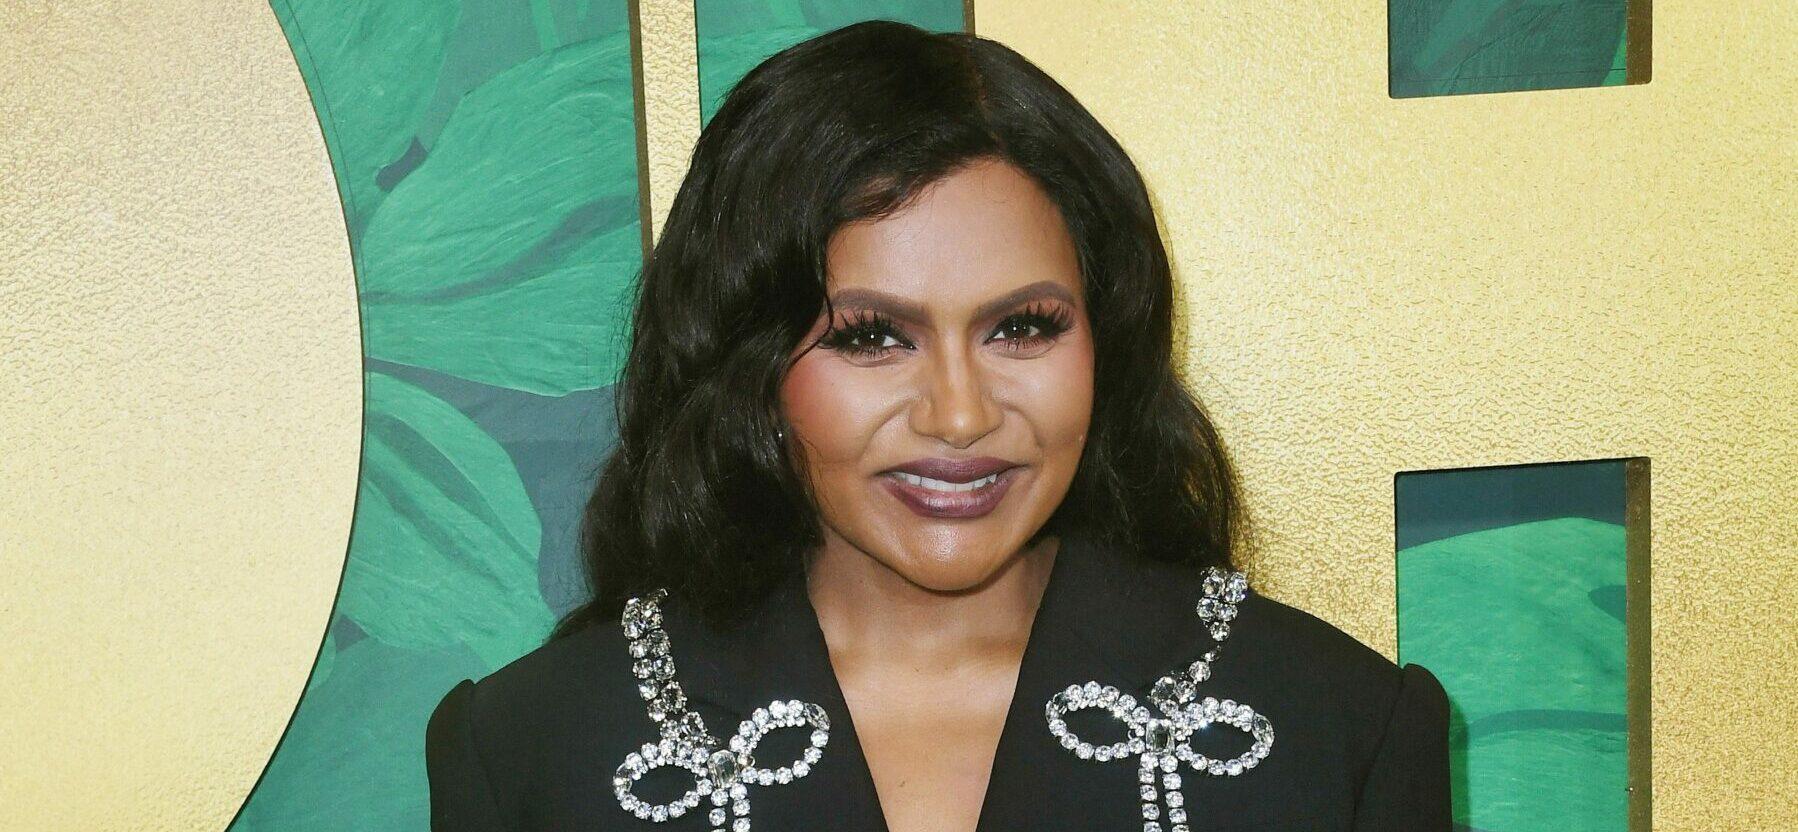 Mindy Kaling Celebrates 10-Year Anniversary Of ‘The Mindy Project’ With Favorite Scenes